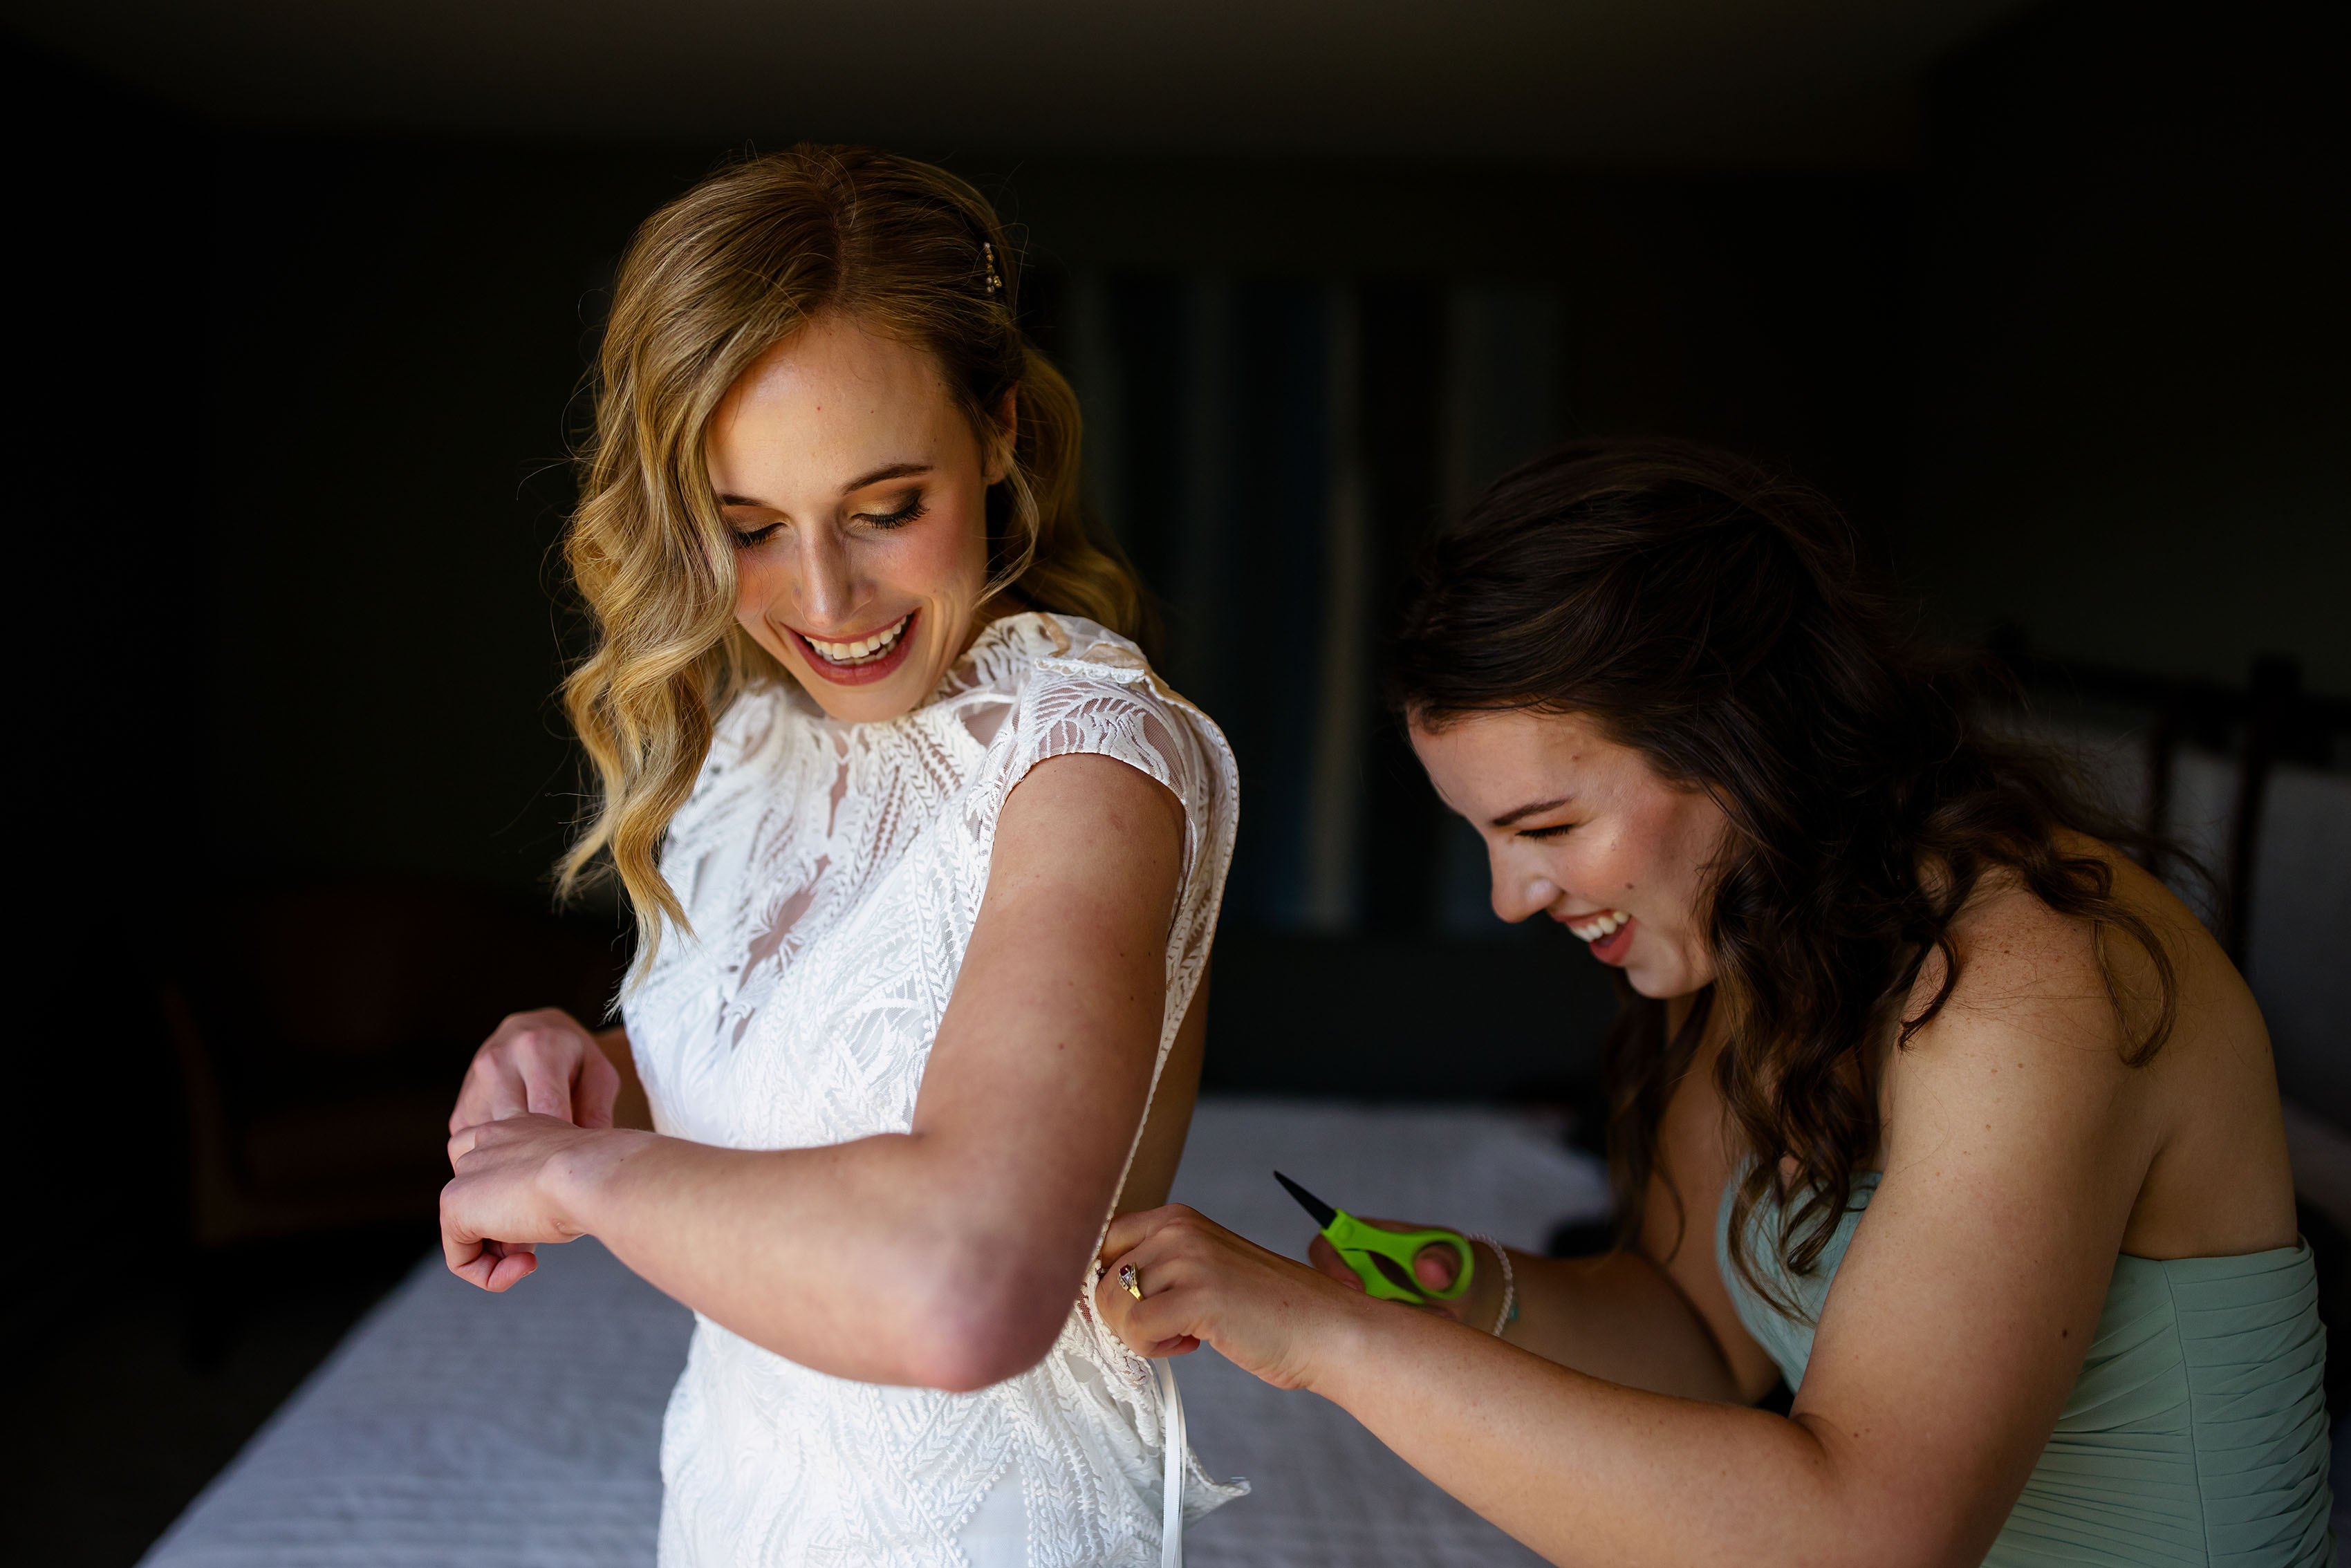 The maid of honor cuts strings off of the bride’s dress